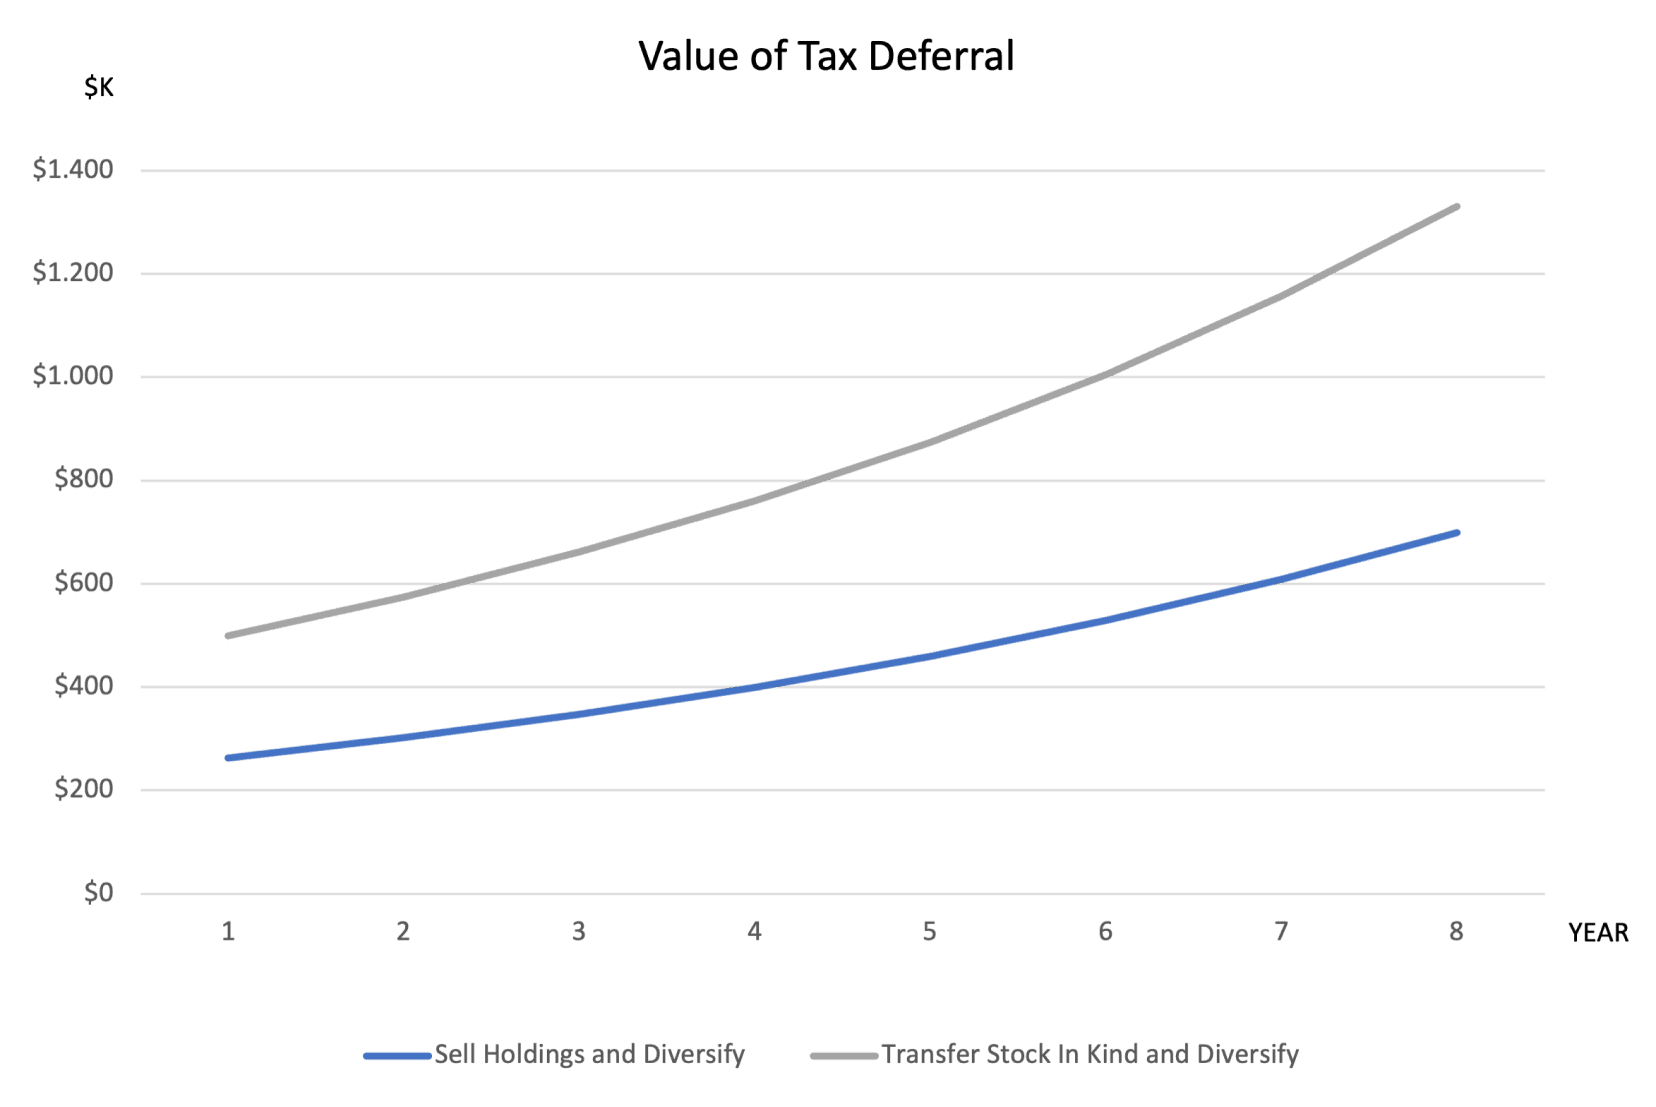 exchange fund overview image 4 value of tax def X4